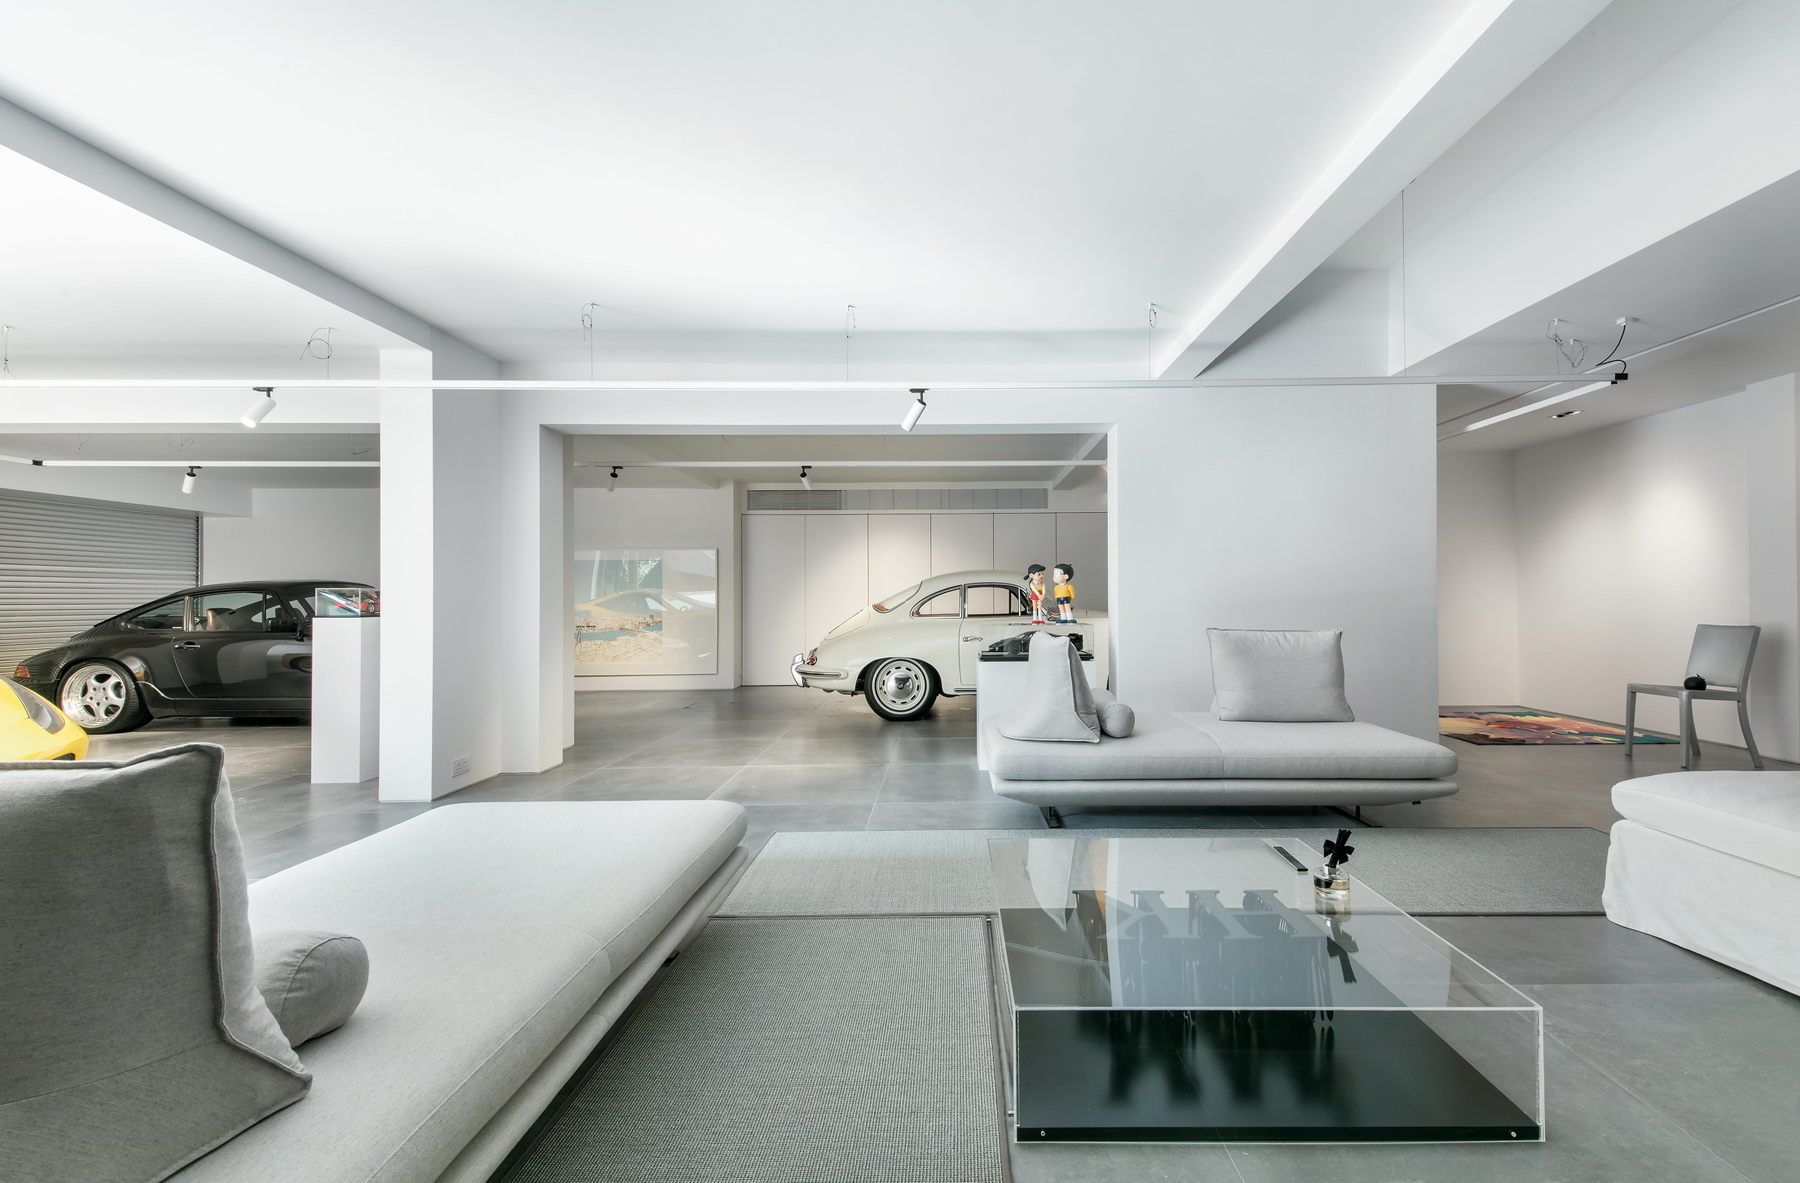 Interior designer Danny Cheng’s Yuen Long home is a car lover’s hideaway